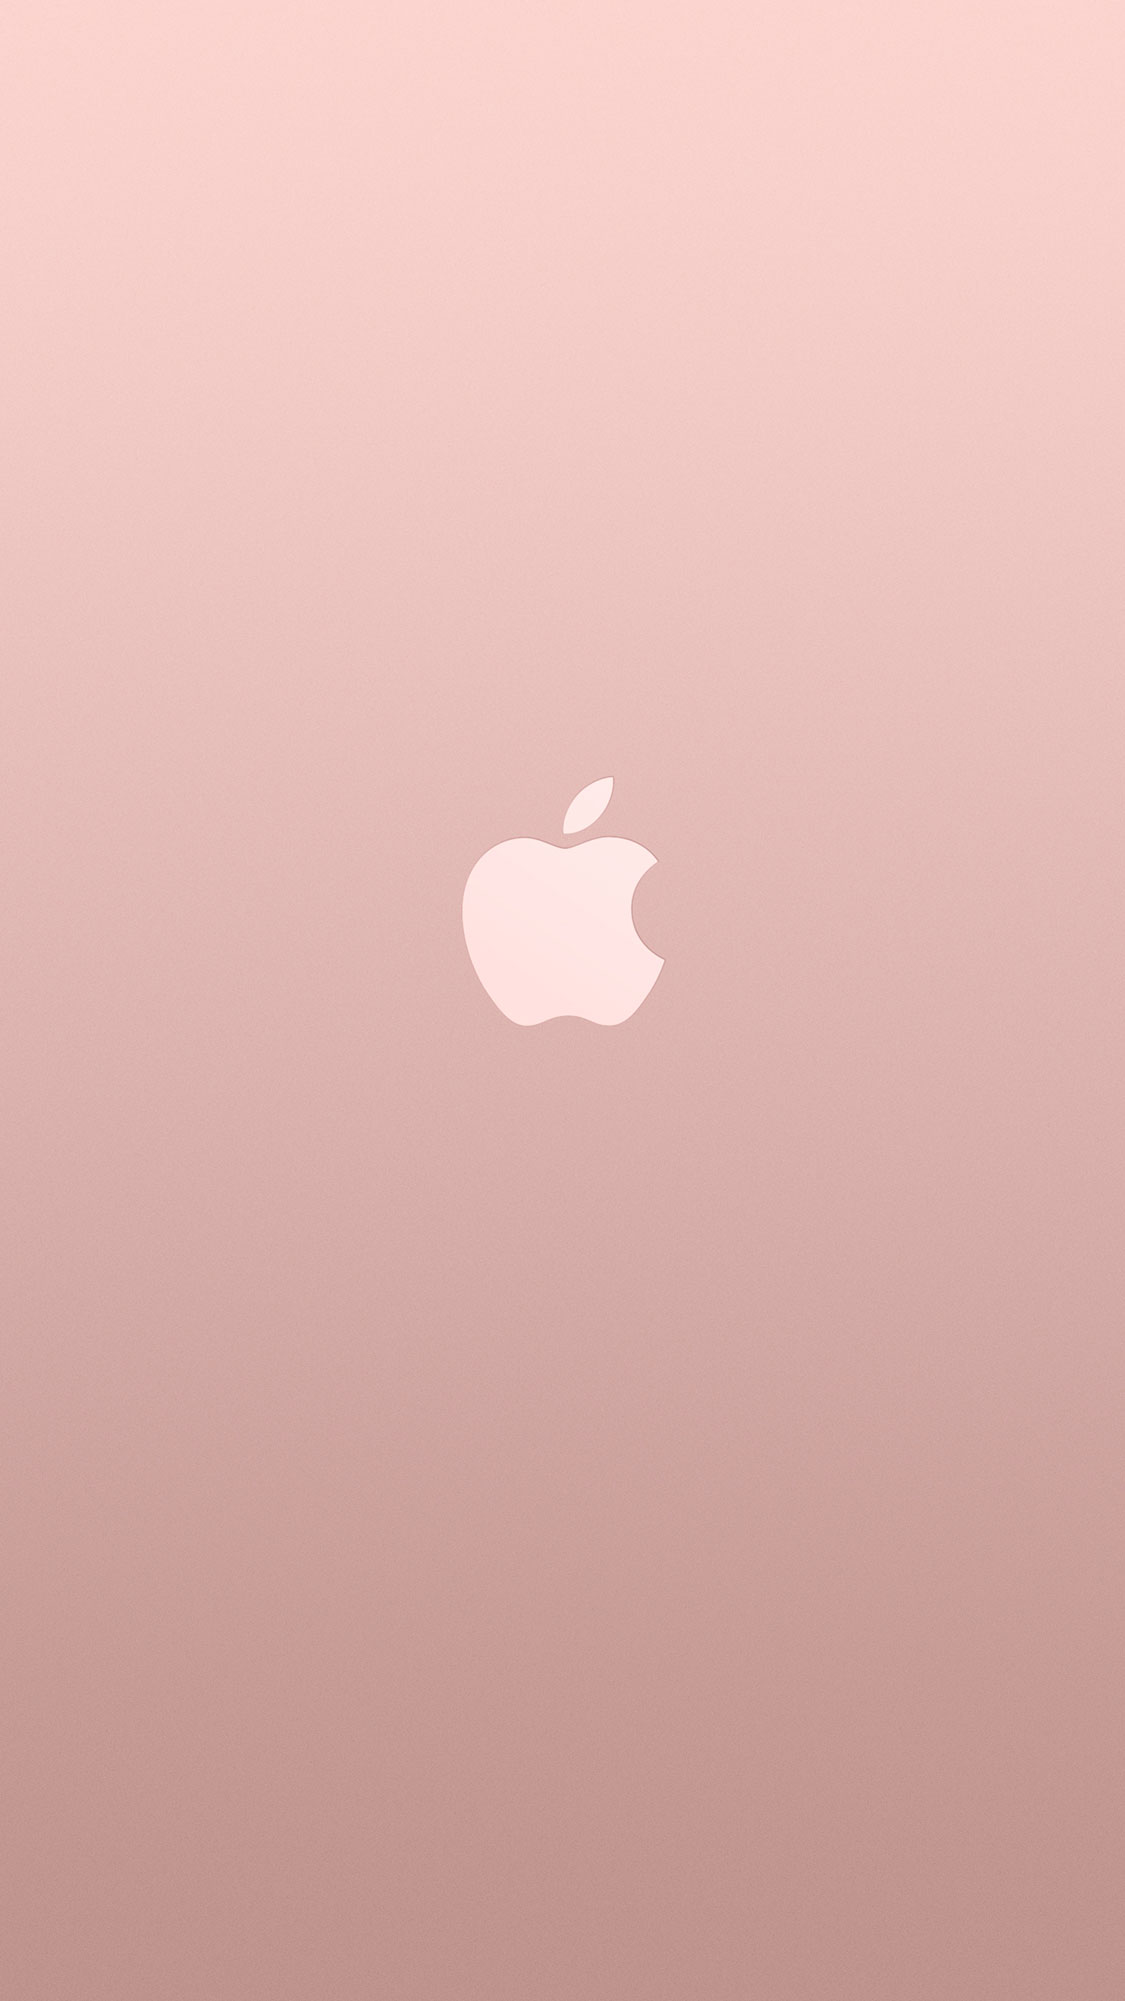 20 New iPhone 6 6S Wallpapers Backgrounds in HD Quality